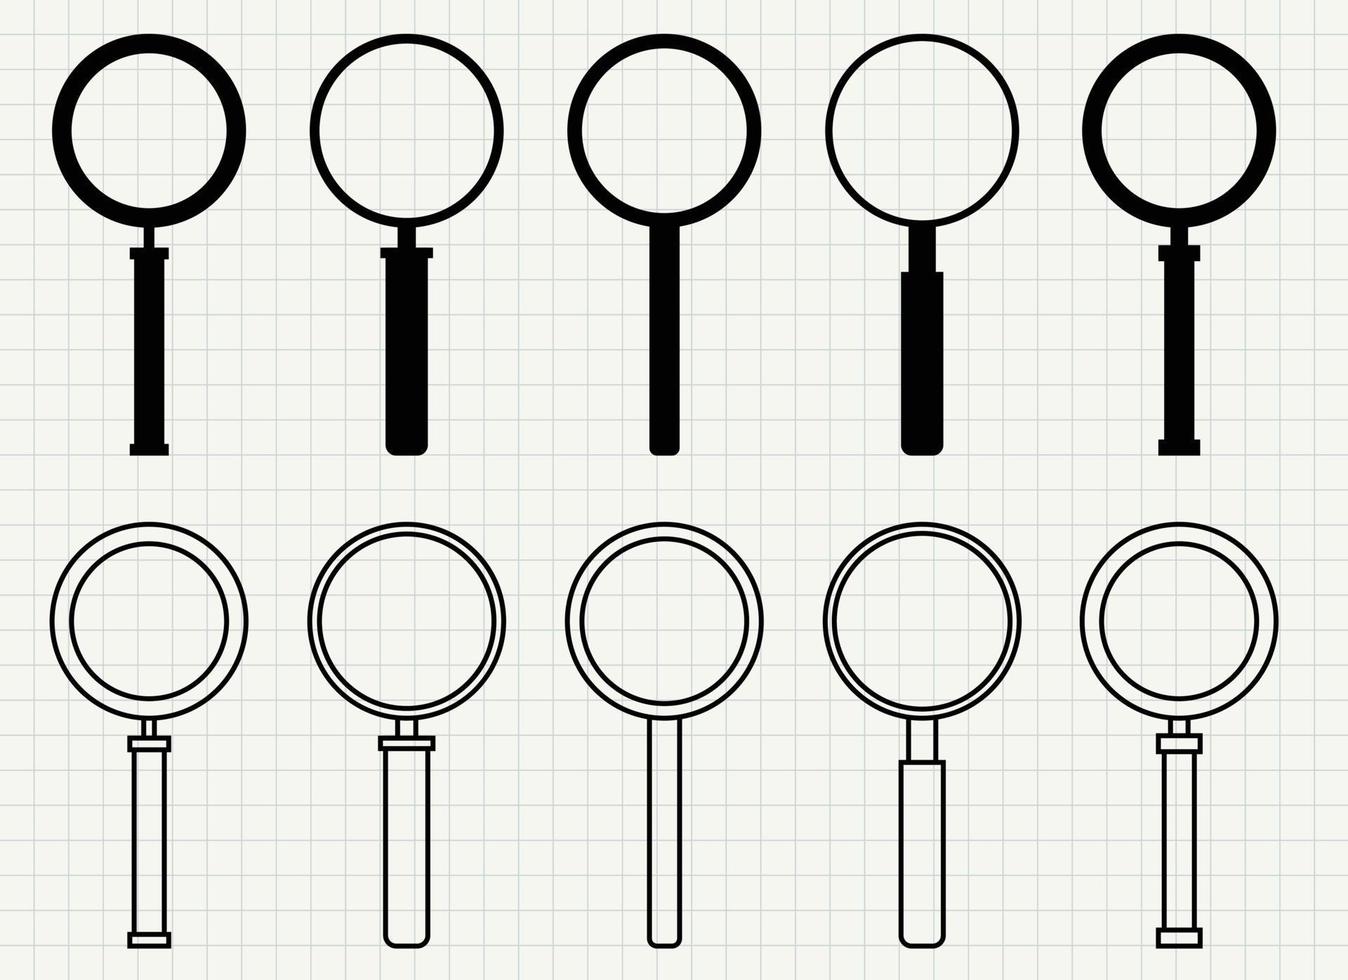 Magnifying glass icon set vector illustration